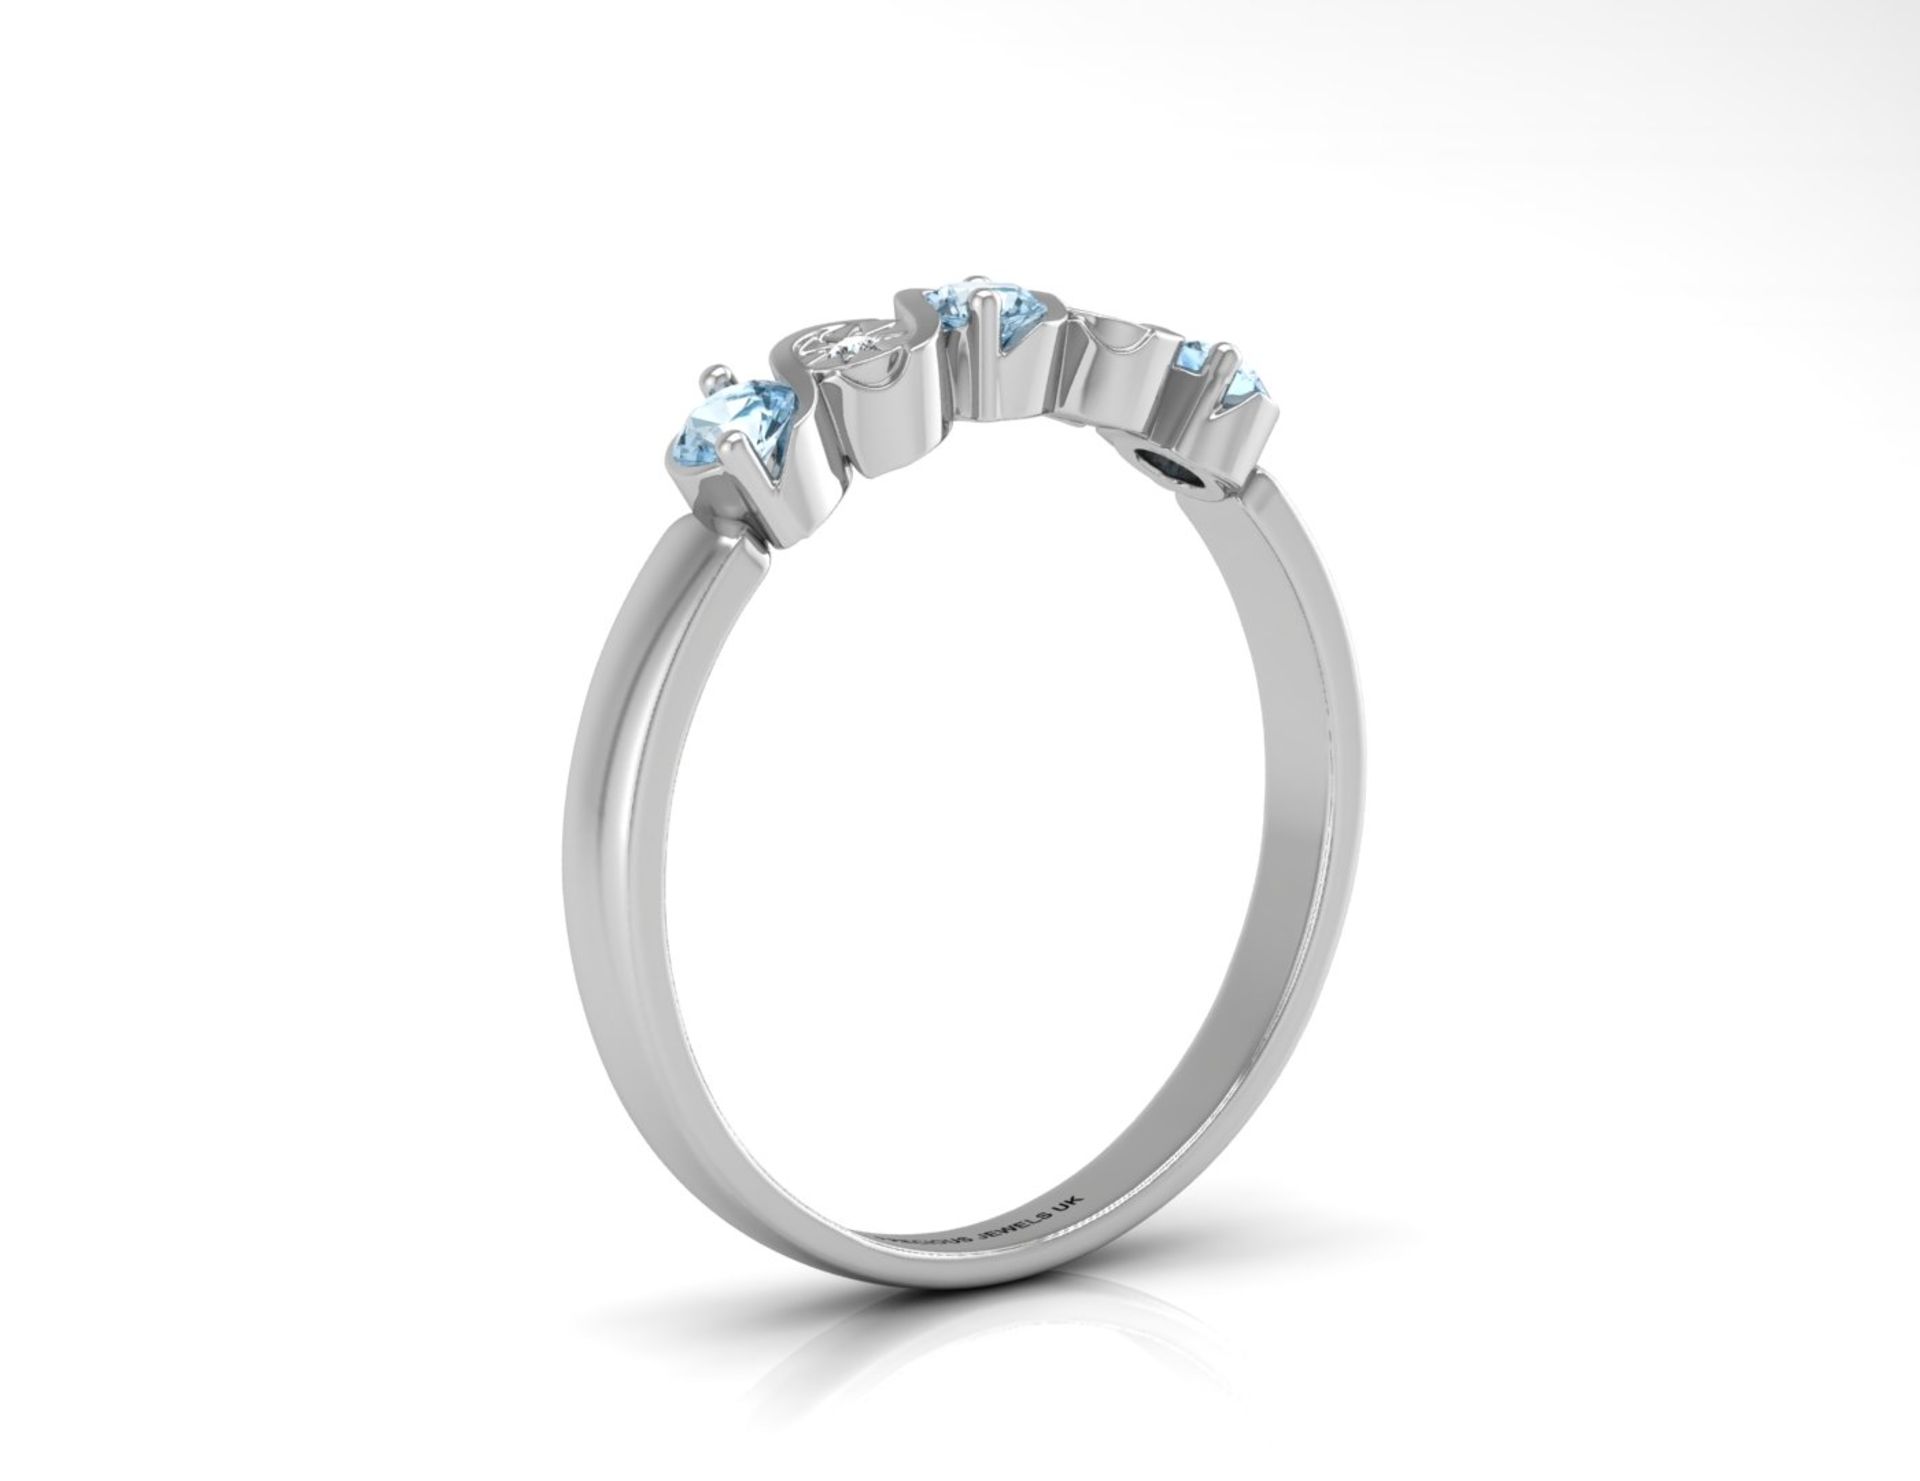 9ct White Gold Semi Eternity Diamond And Blue Topaz Ring 0.01 Carats - Image 2 of 4